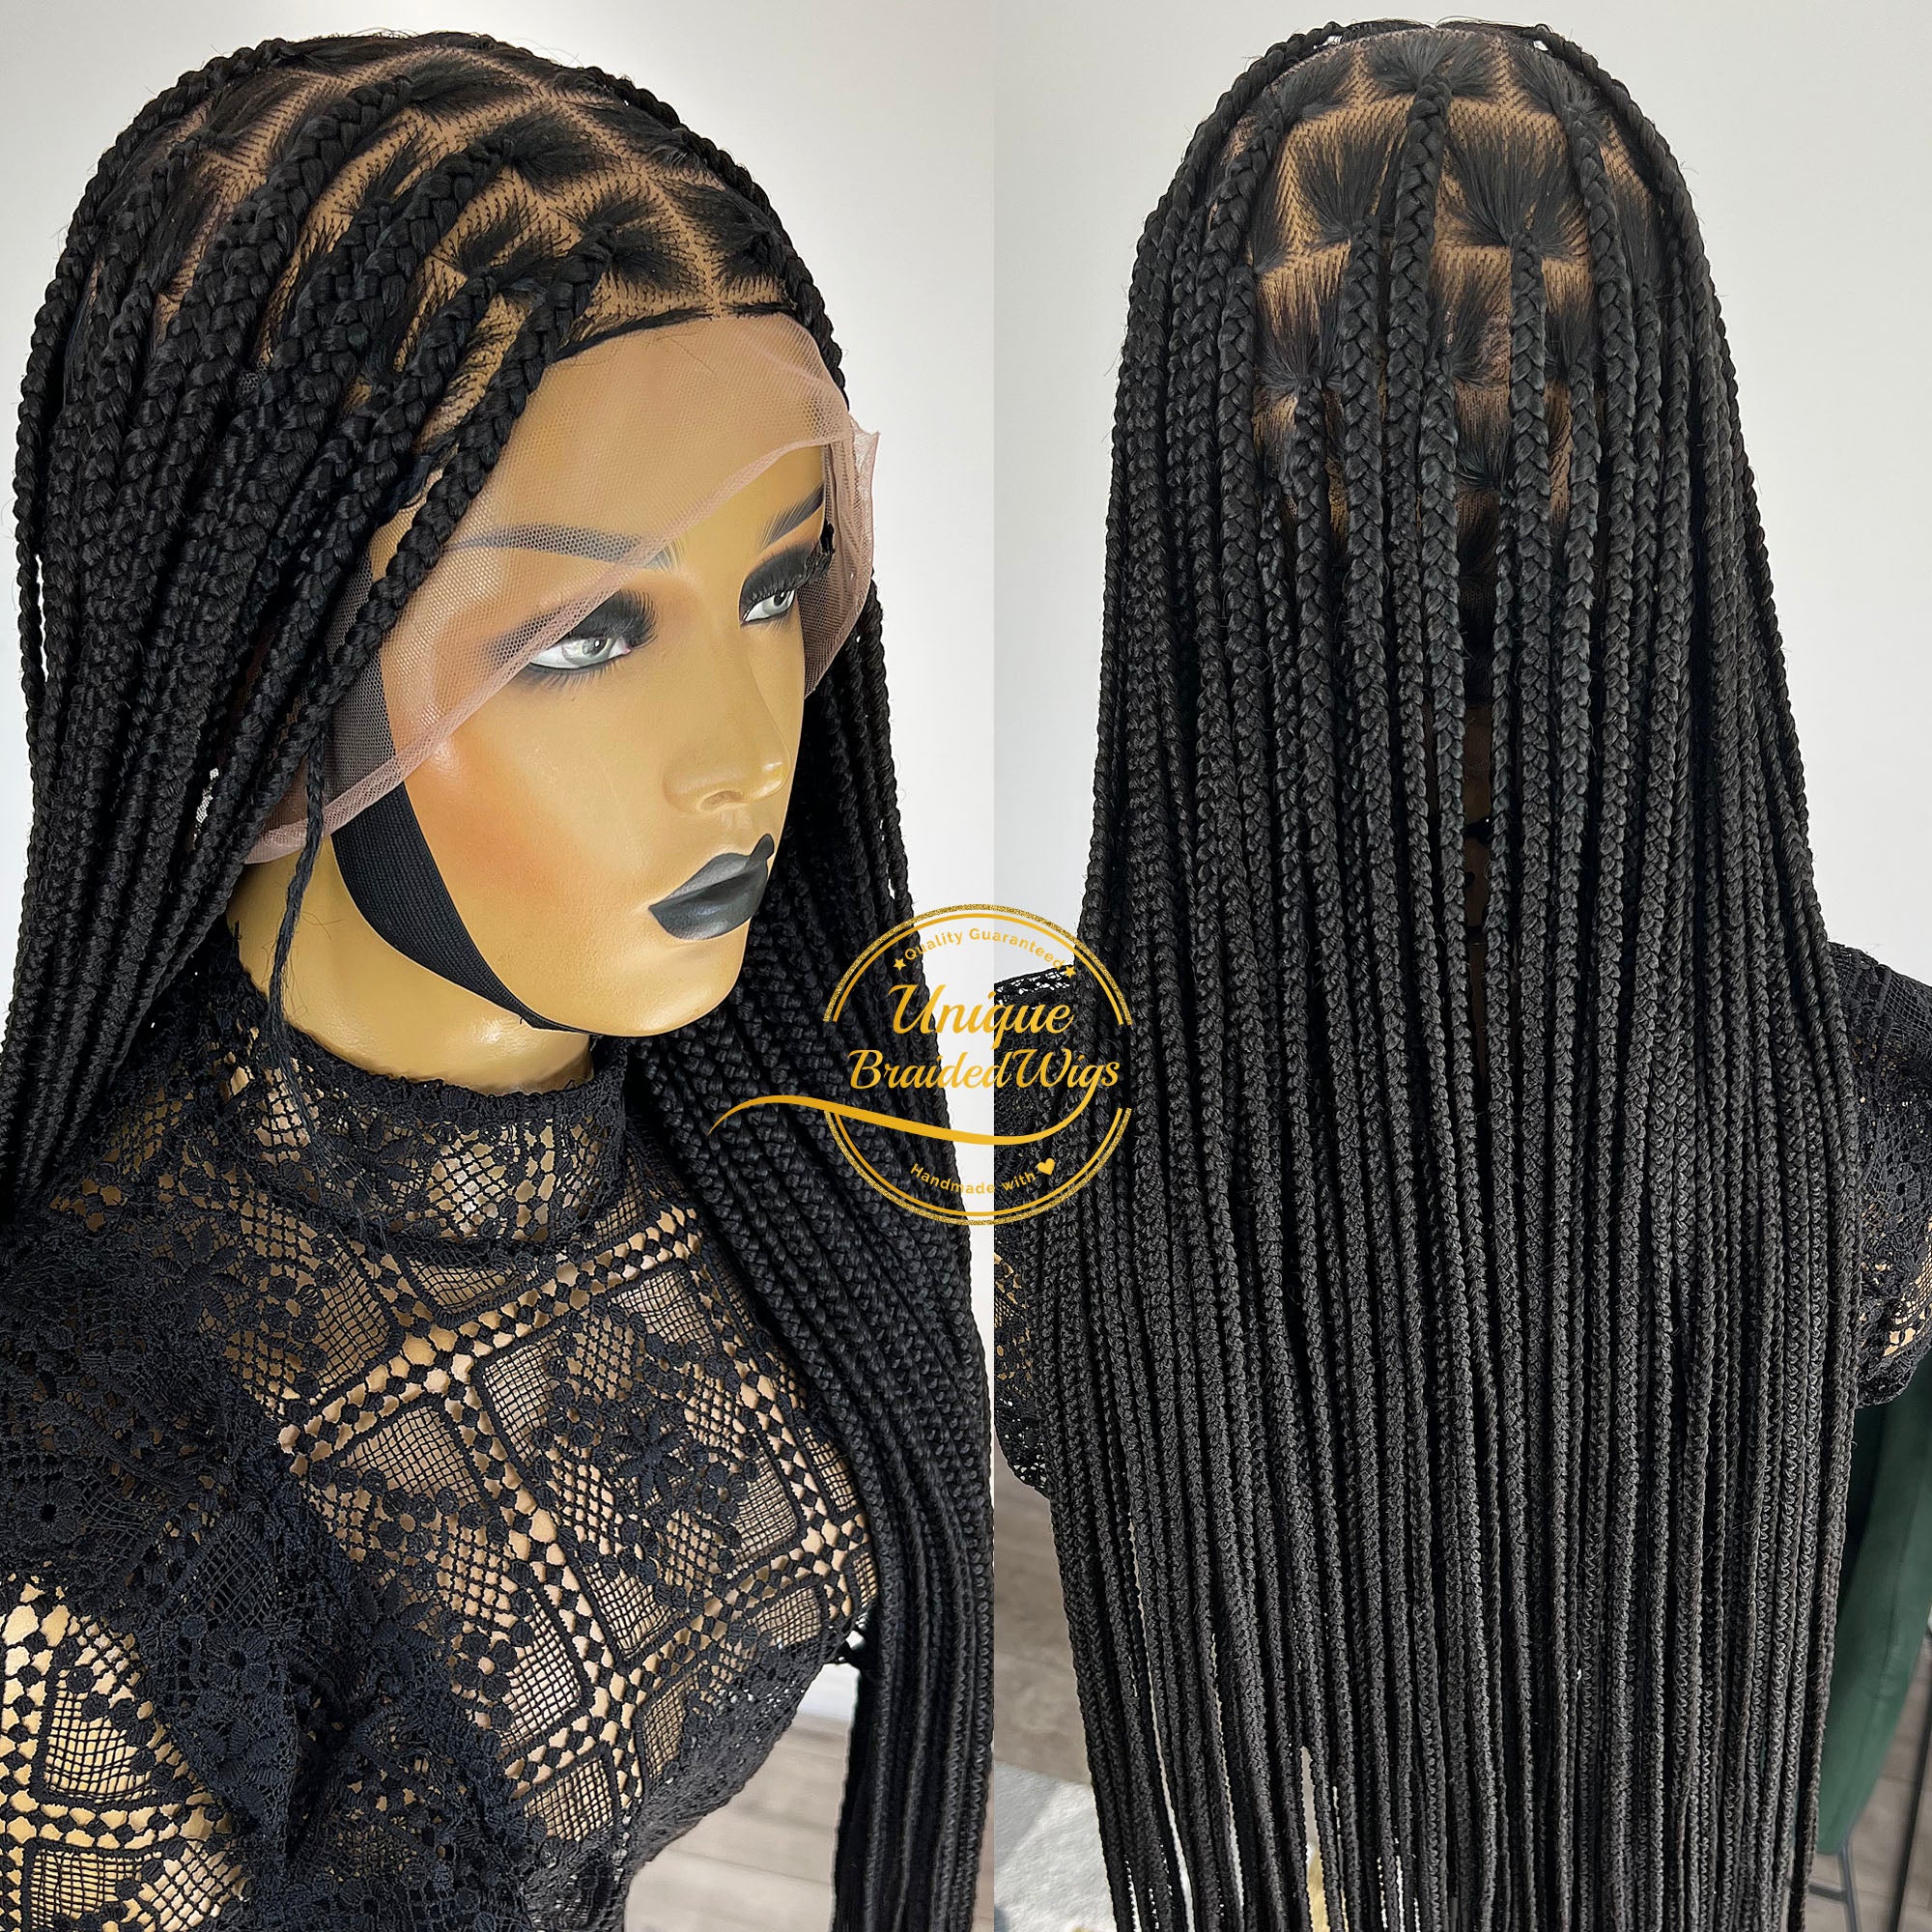 New Dark Blue Knotless Braid Wig Available on Full Lace Wig